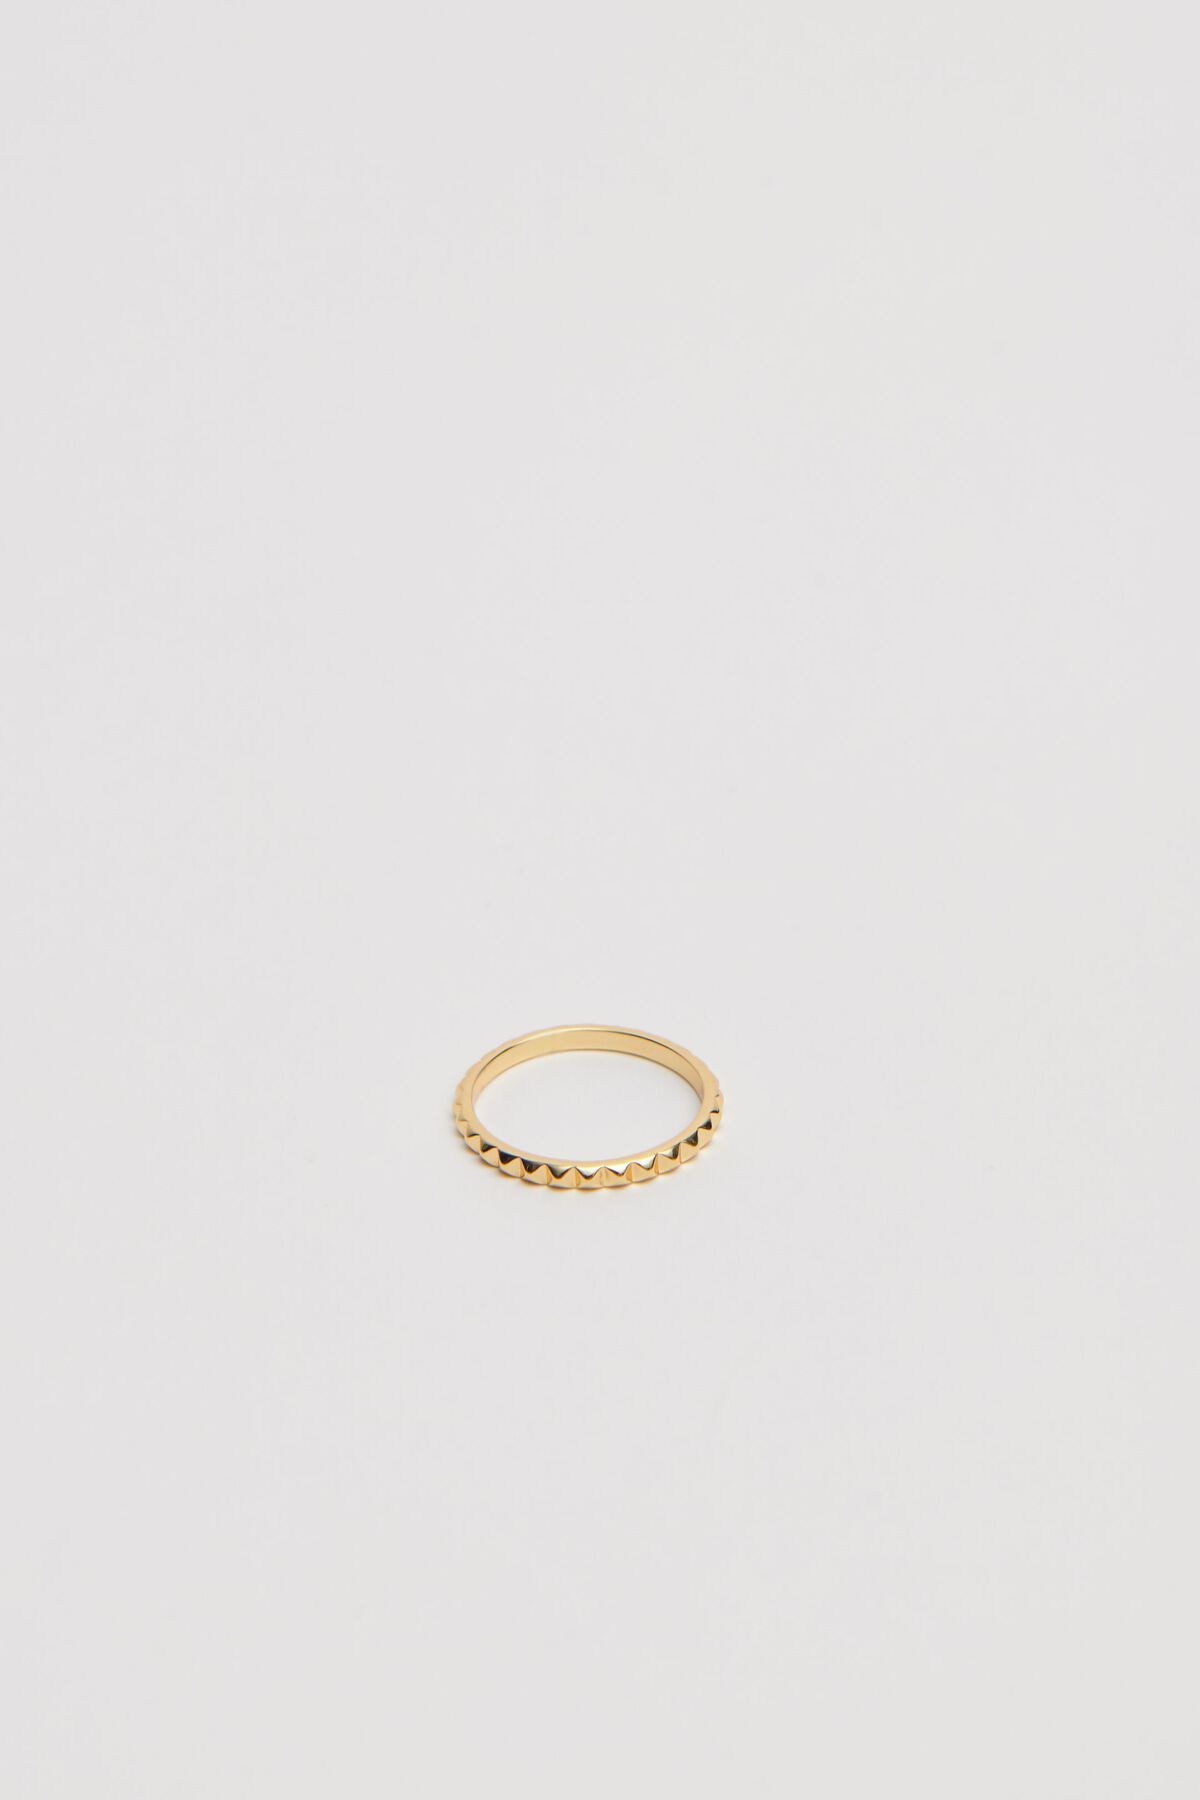 Dynamite 14K Gold Plated Micro Studded Ring. 3